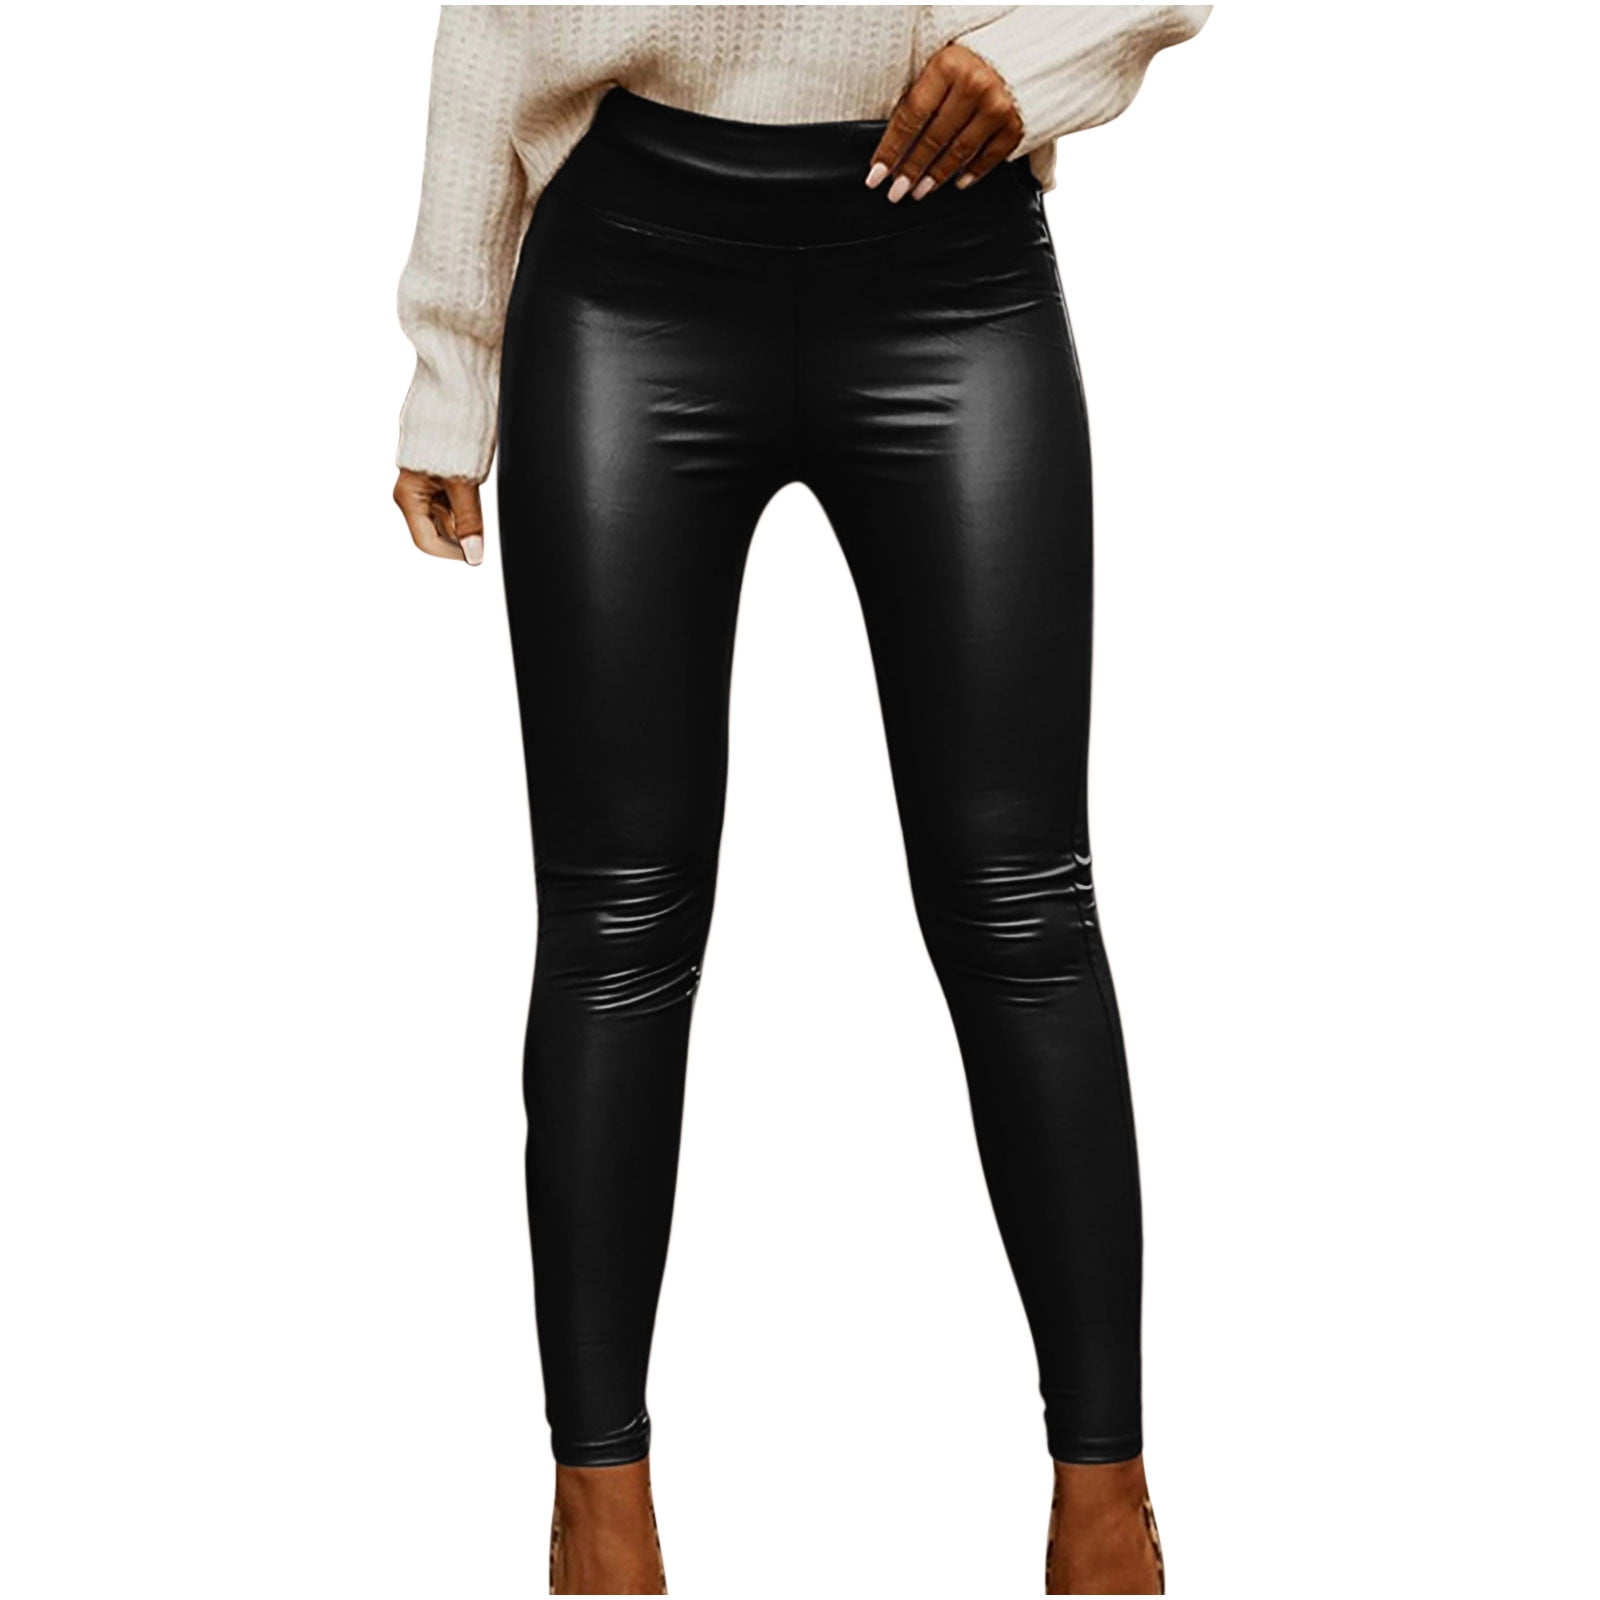 ZFLL Leggings,Pockets Leggings Fitness Yoga Pants High Waist Sexy Curvy  Elastic Leggins Fashion Stretch Women Thickened Leather Pants,A,Black,XL:  Buy Online at Best Price in UAE 